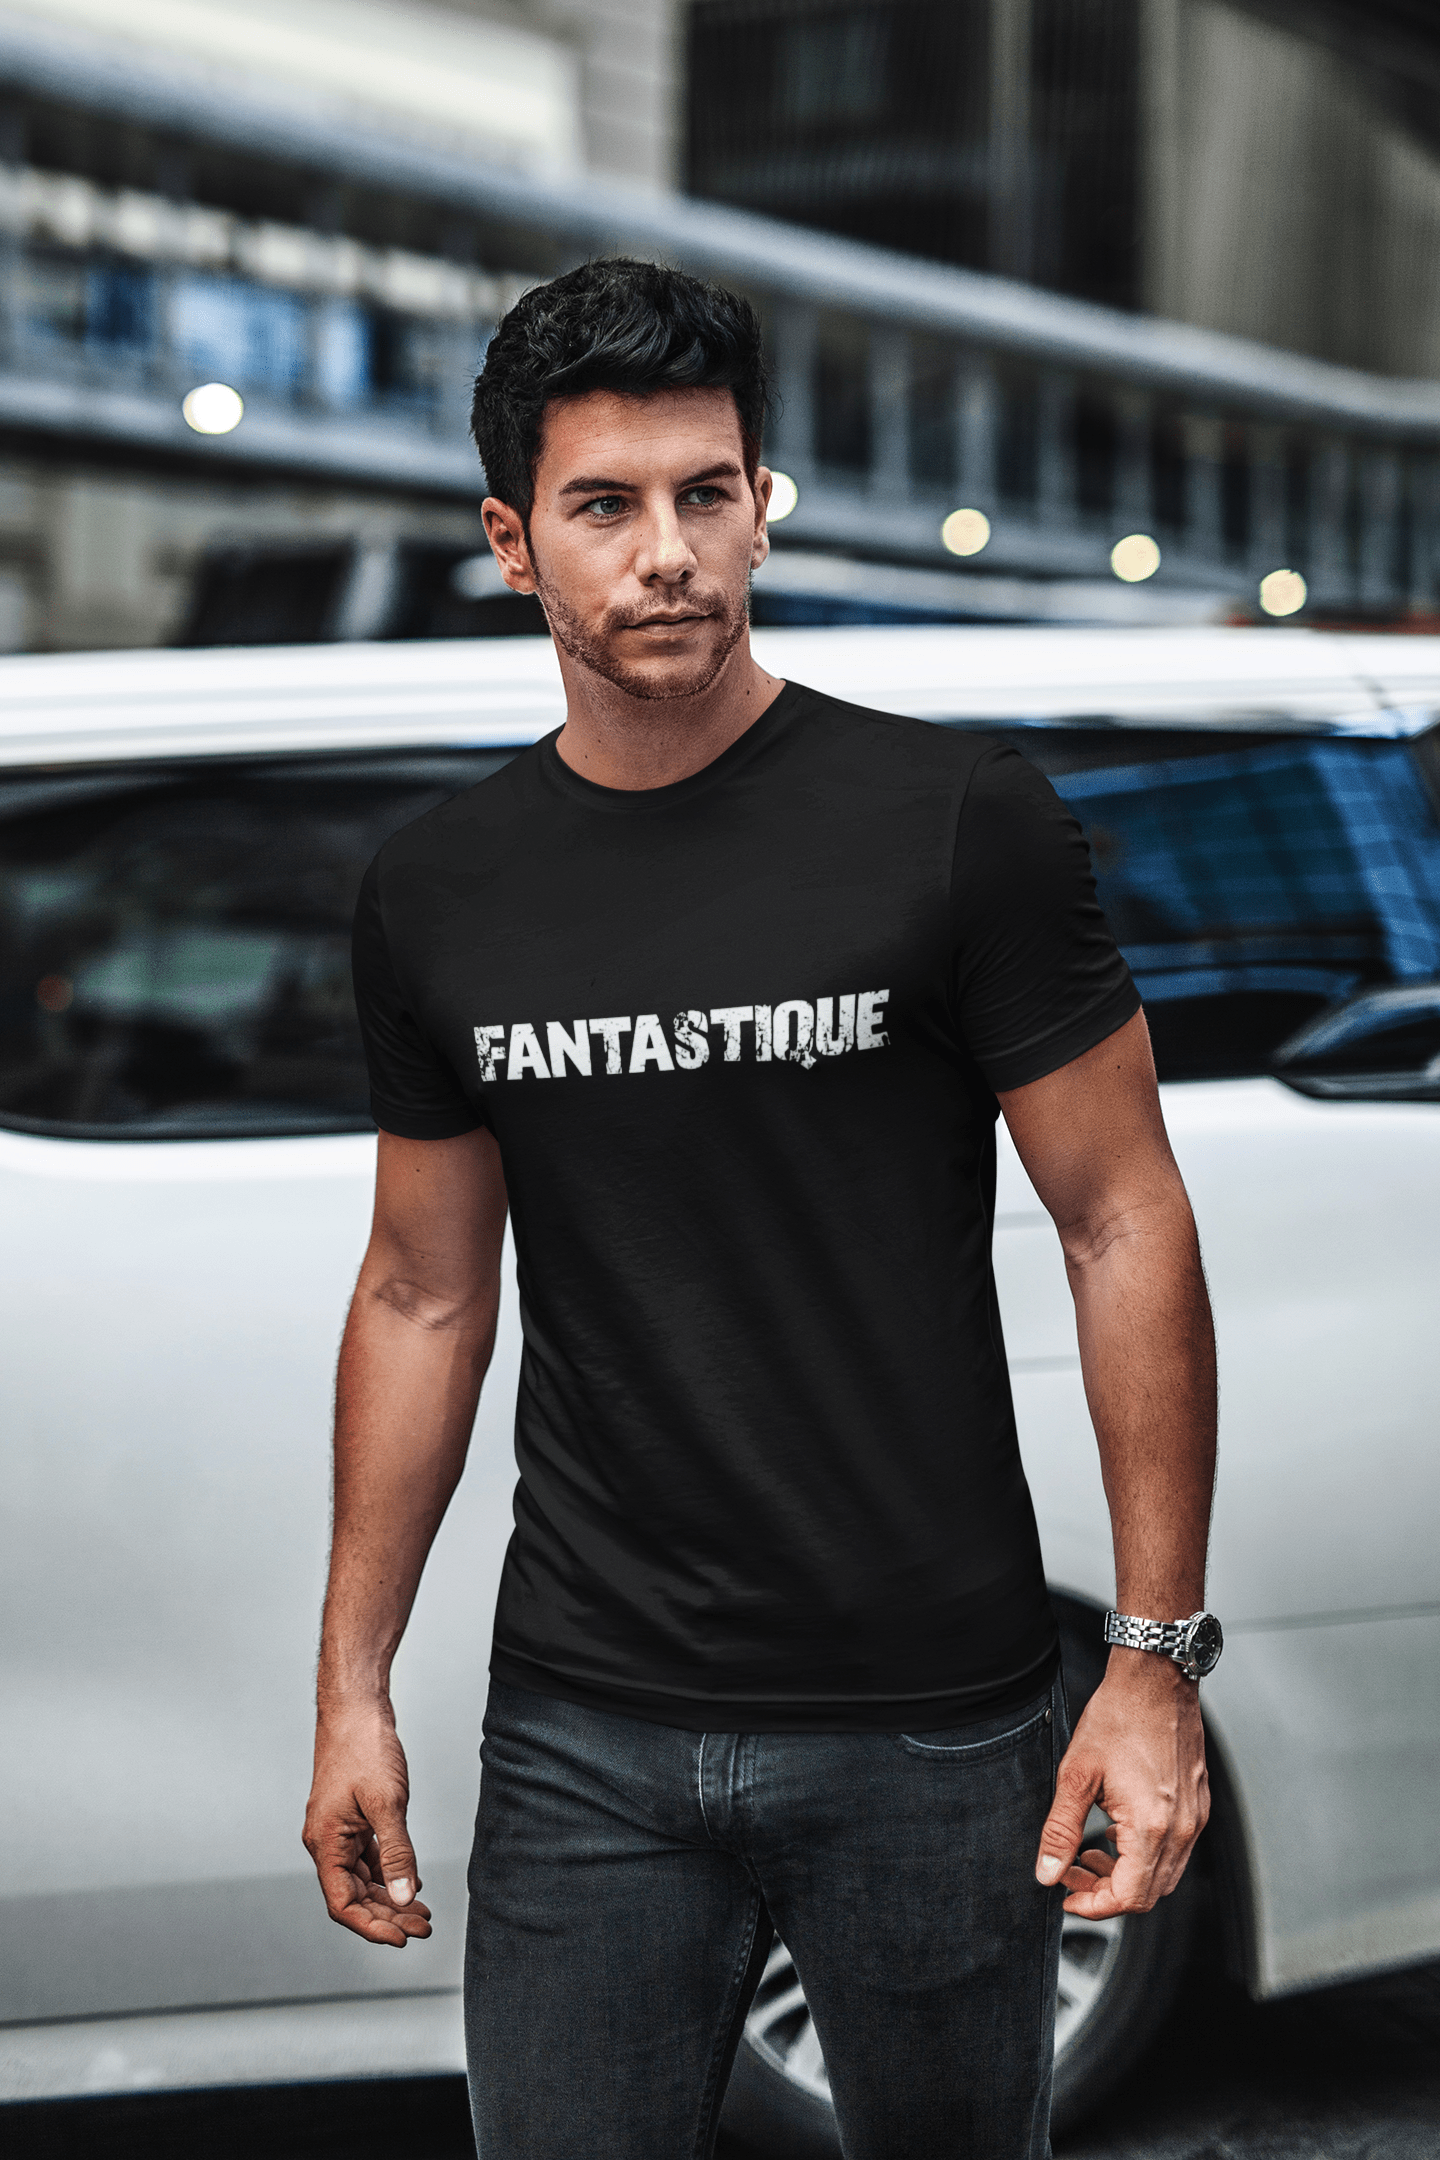 fantastique, French Dictionary, Men's Short Sleeve Round Neck T-shirt 00009